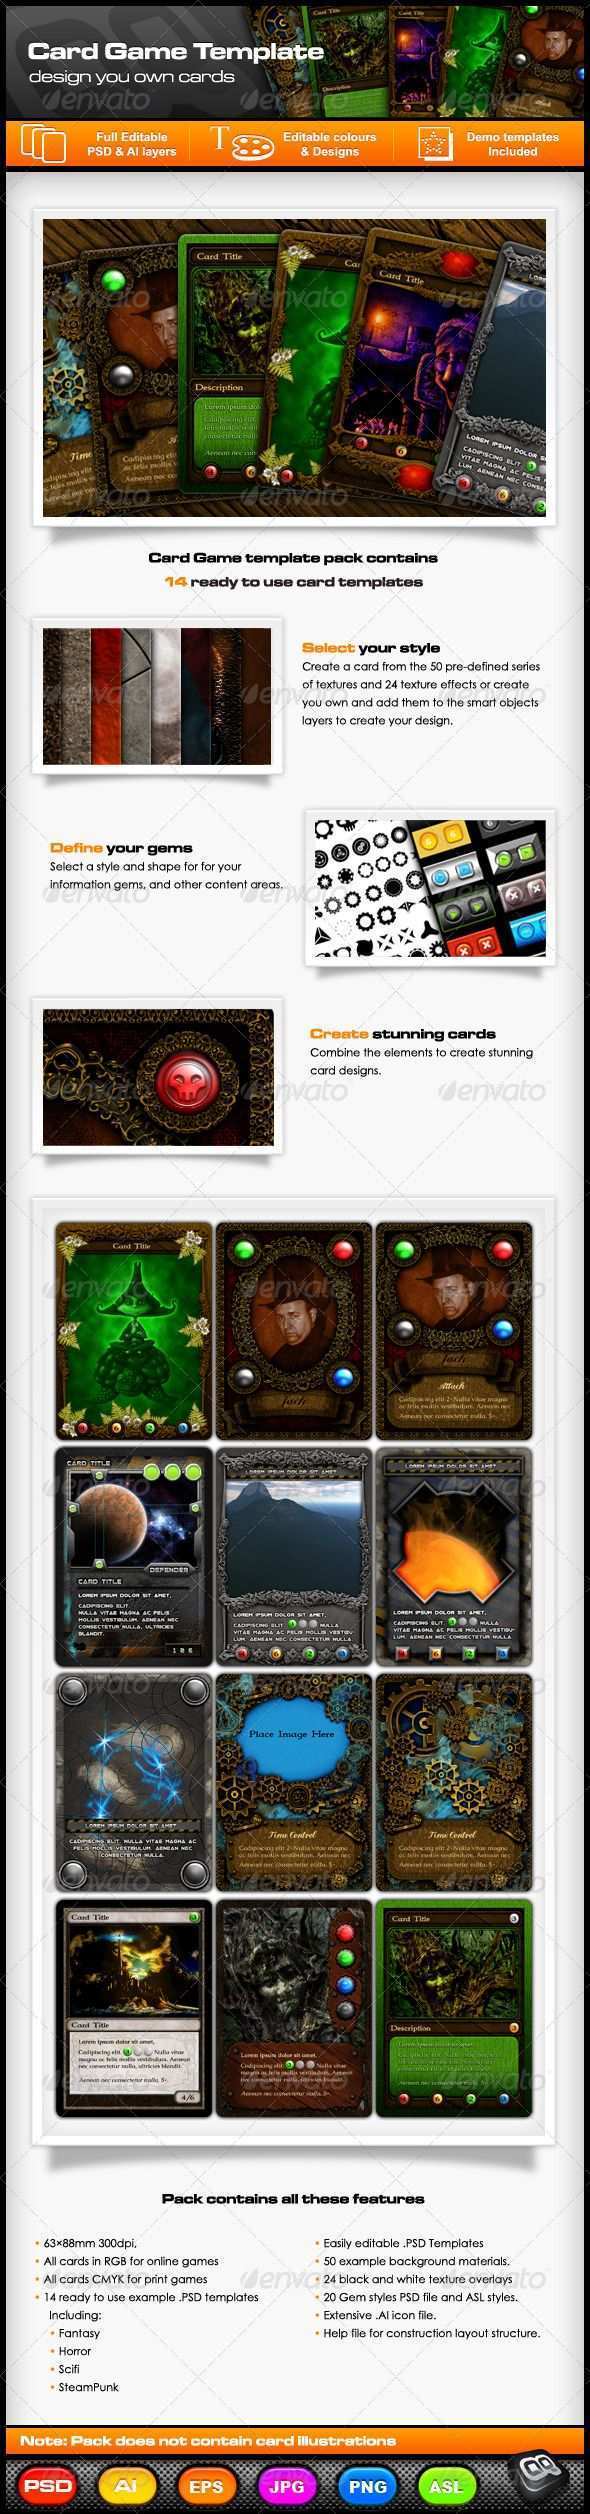 84 The Best Card Game Template Psd PSD File with Card Game Template Psd